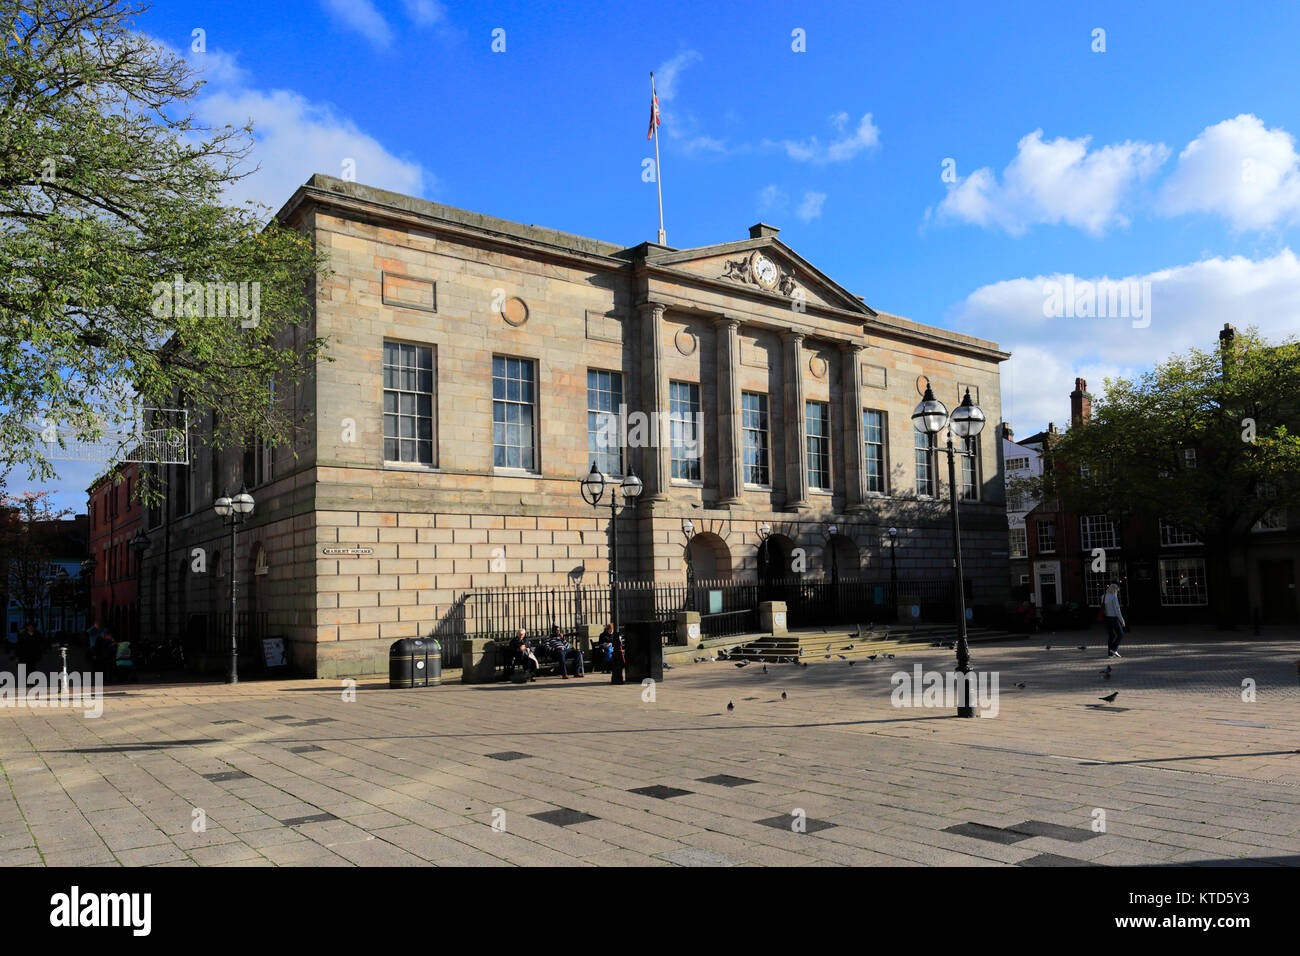 The Shire Hall building, market place, Stafford town, Staffordshire, England, UK Stock Photo